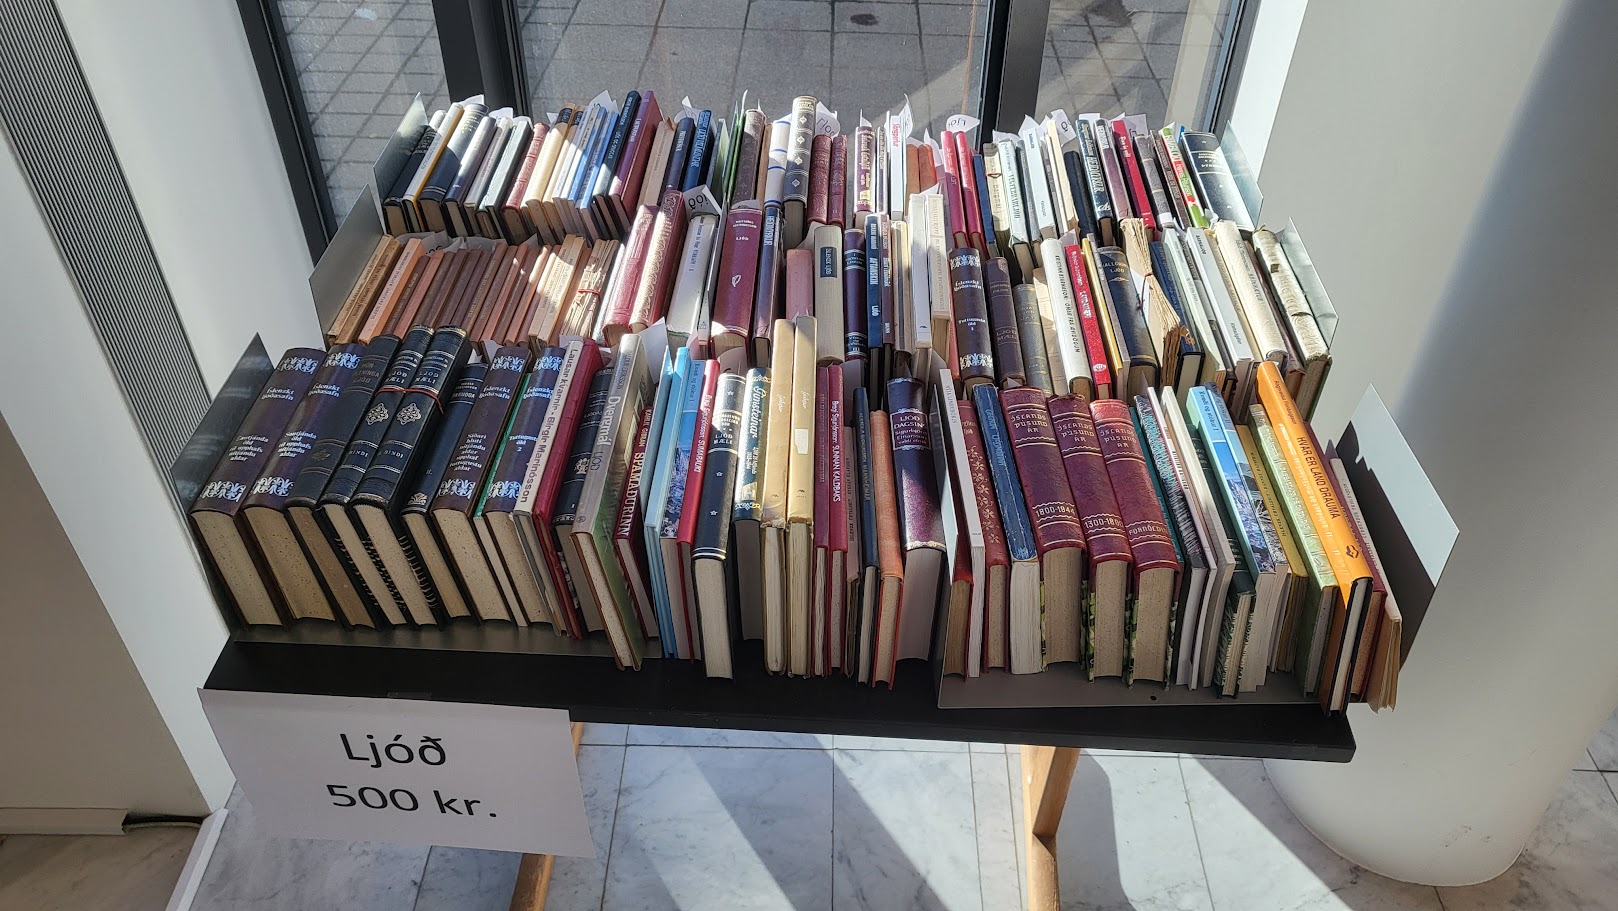 Books on the book market